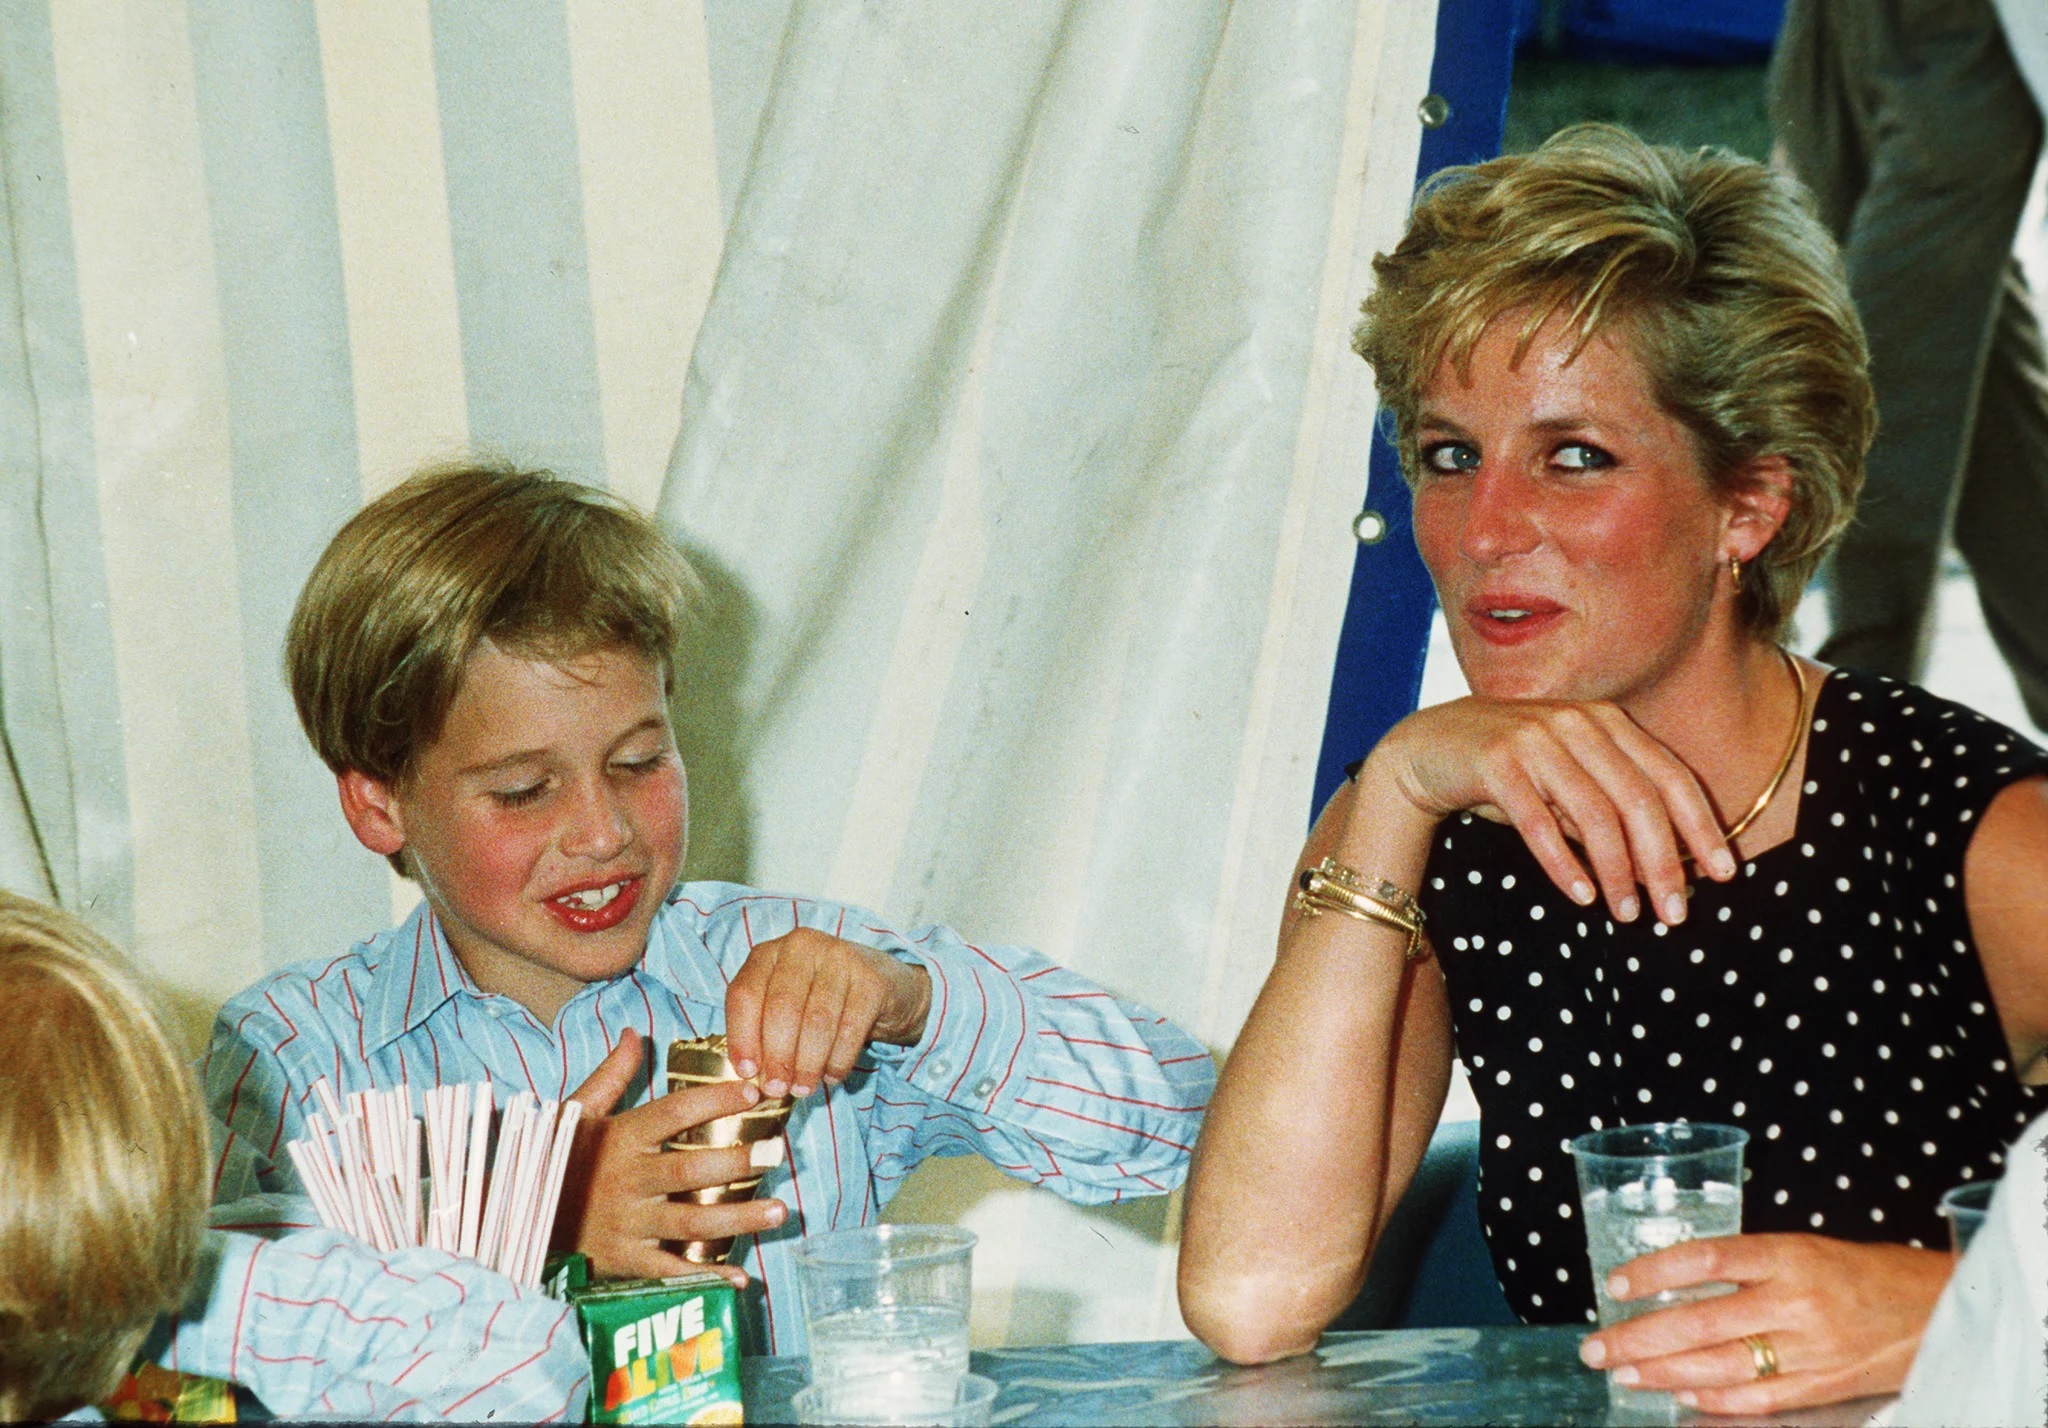 Prince William reveals heartbreaking reaction to Diana's death